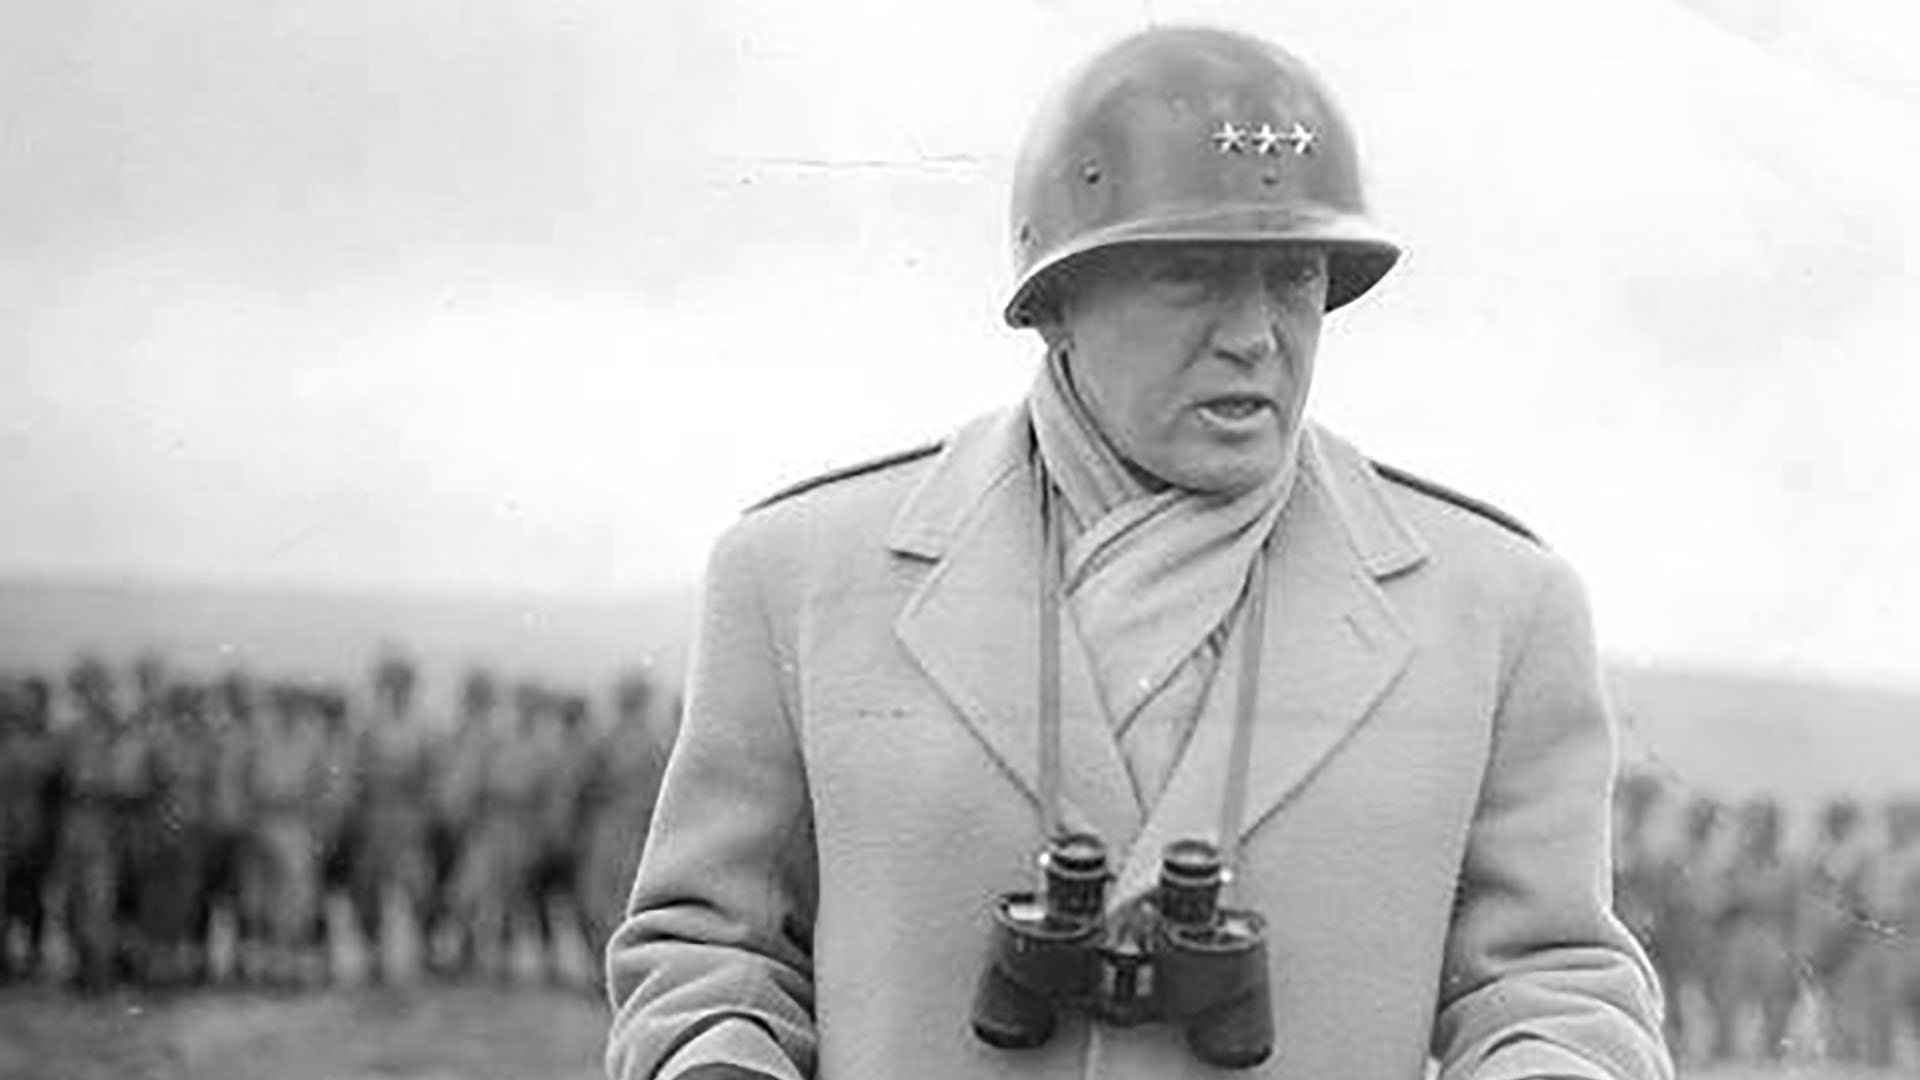 Lieutenant General Patton delivers an address, quite possibly his famous speech, to men of the 5th Infantry Division, U.S. Army in the Mourne Mountains, Co. Down on 30th March 1944.